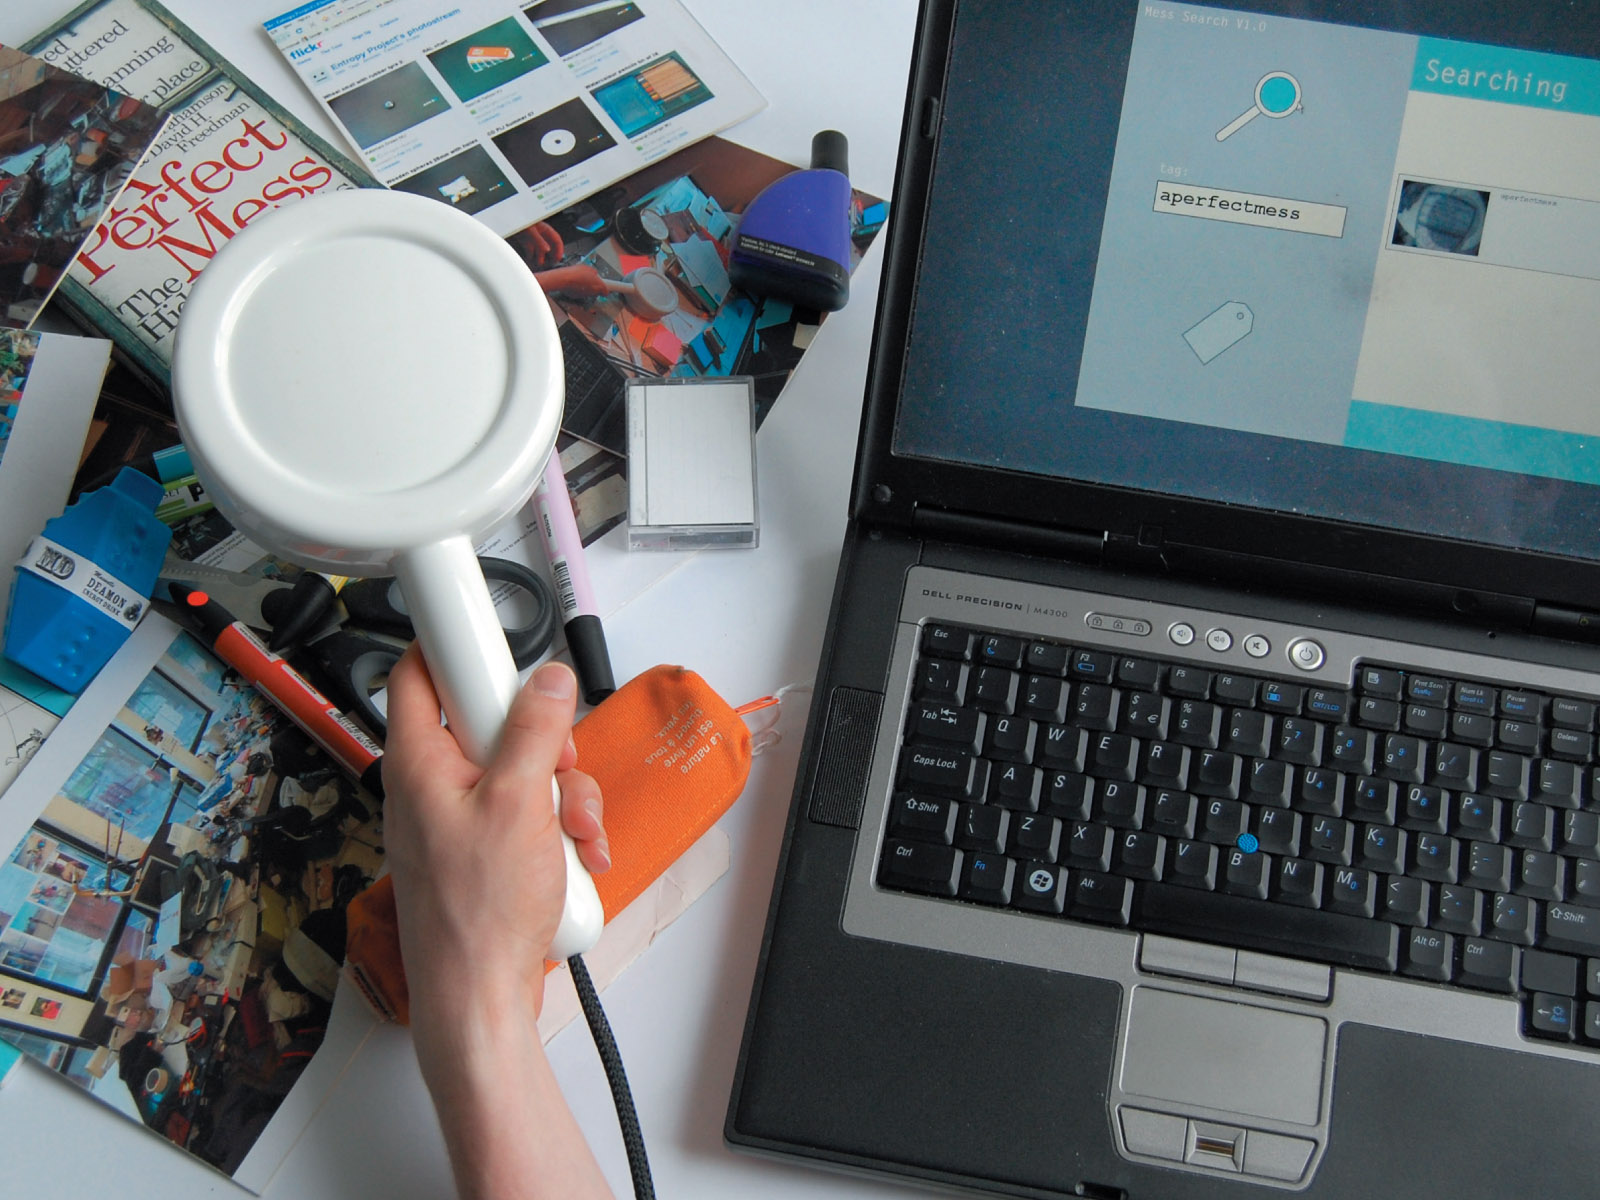 The MessSearch, a plastic magnifying glass scanning a desk